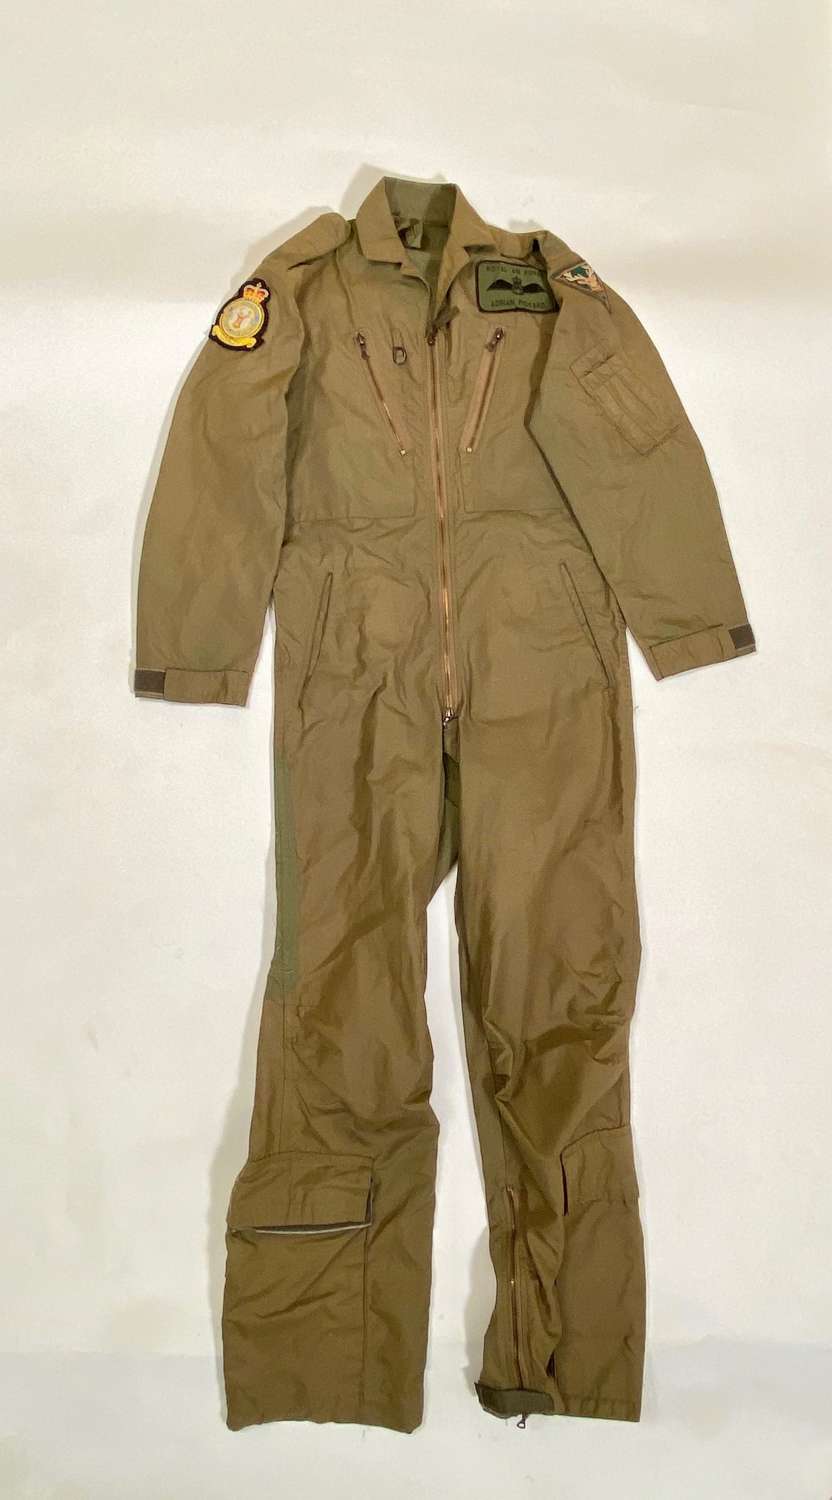 RAF Attributed Helicopter Pilot Flying Suit.